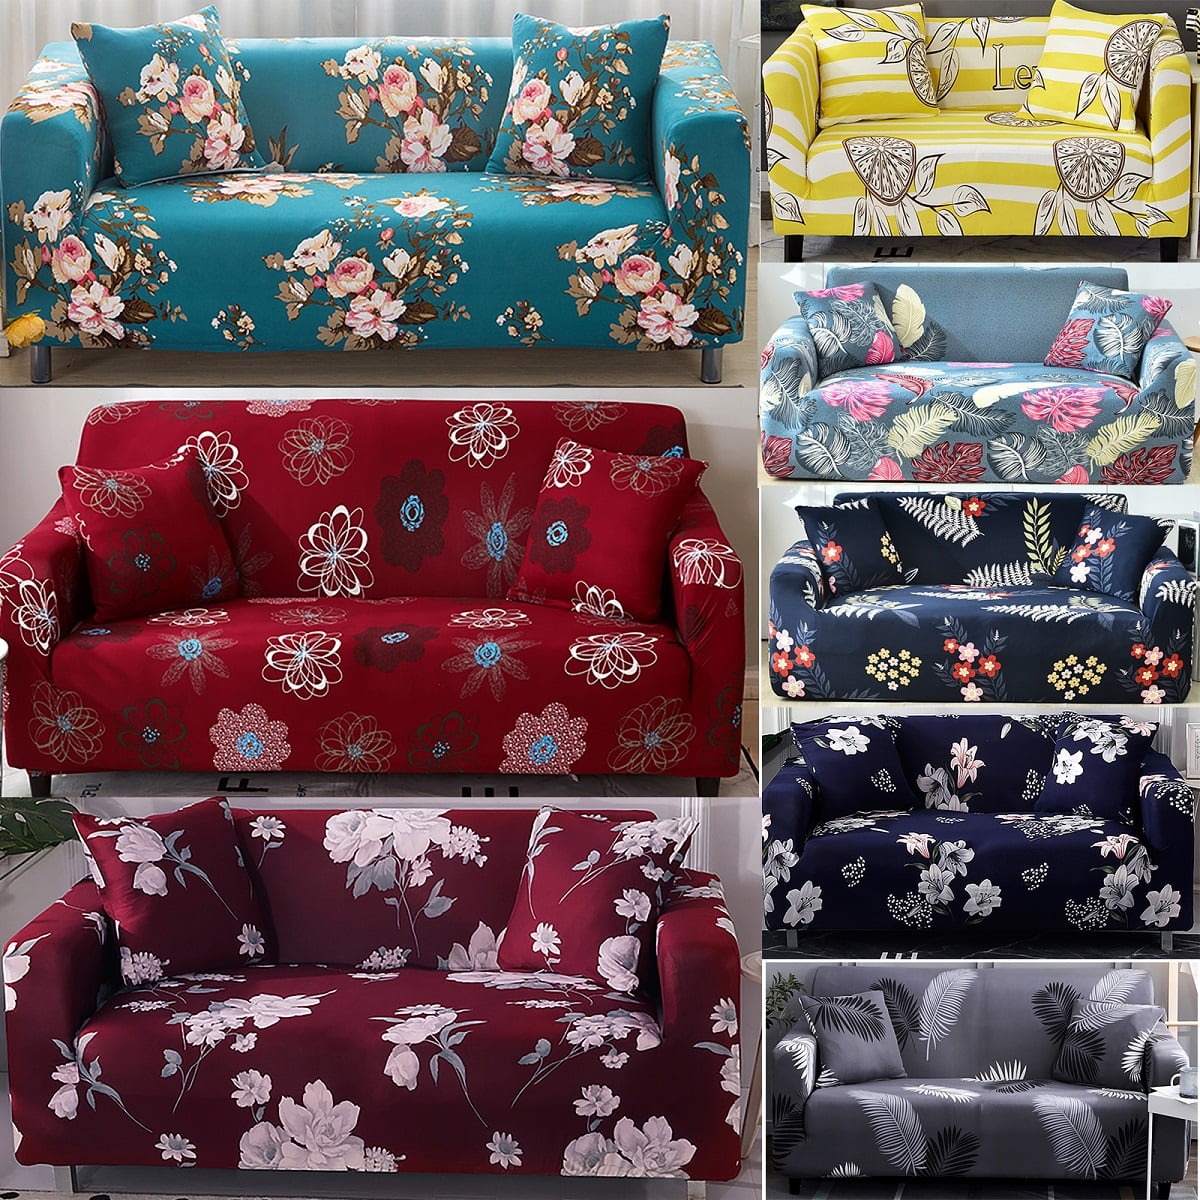 12-Type 1 2 3 Seater Printed Slipcover Sofa Cover High Stretch Elastic Protector 